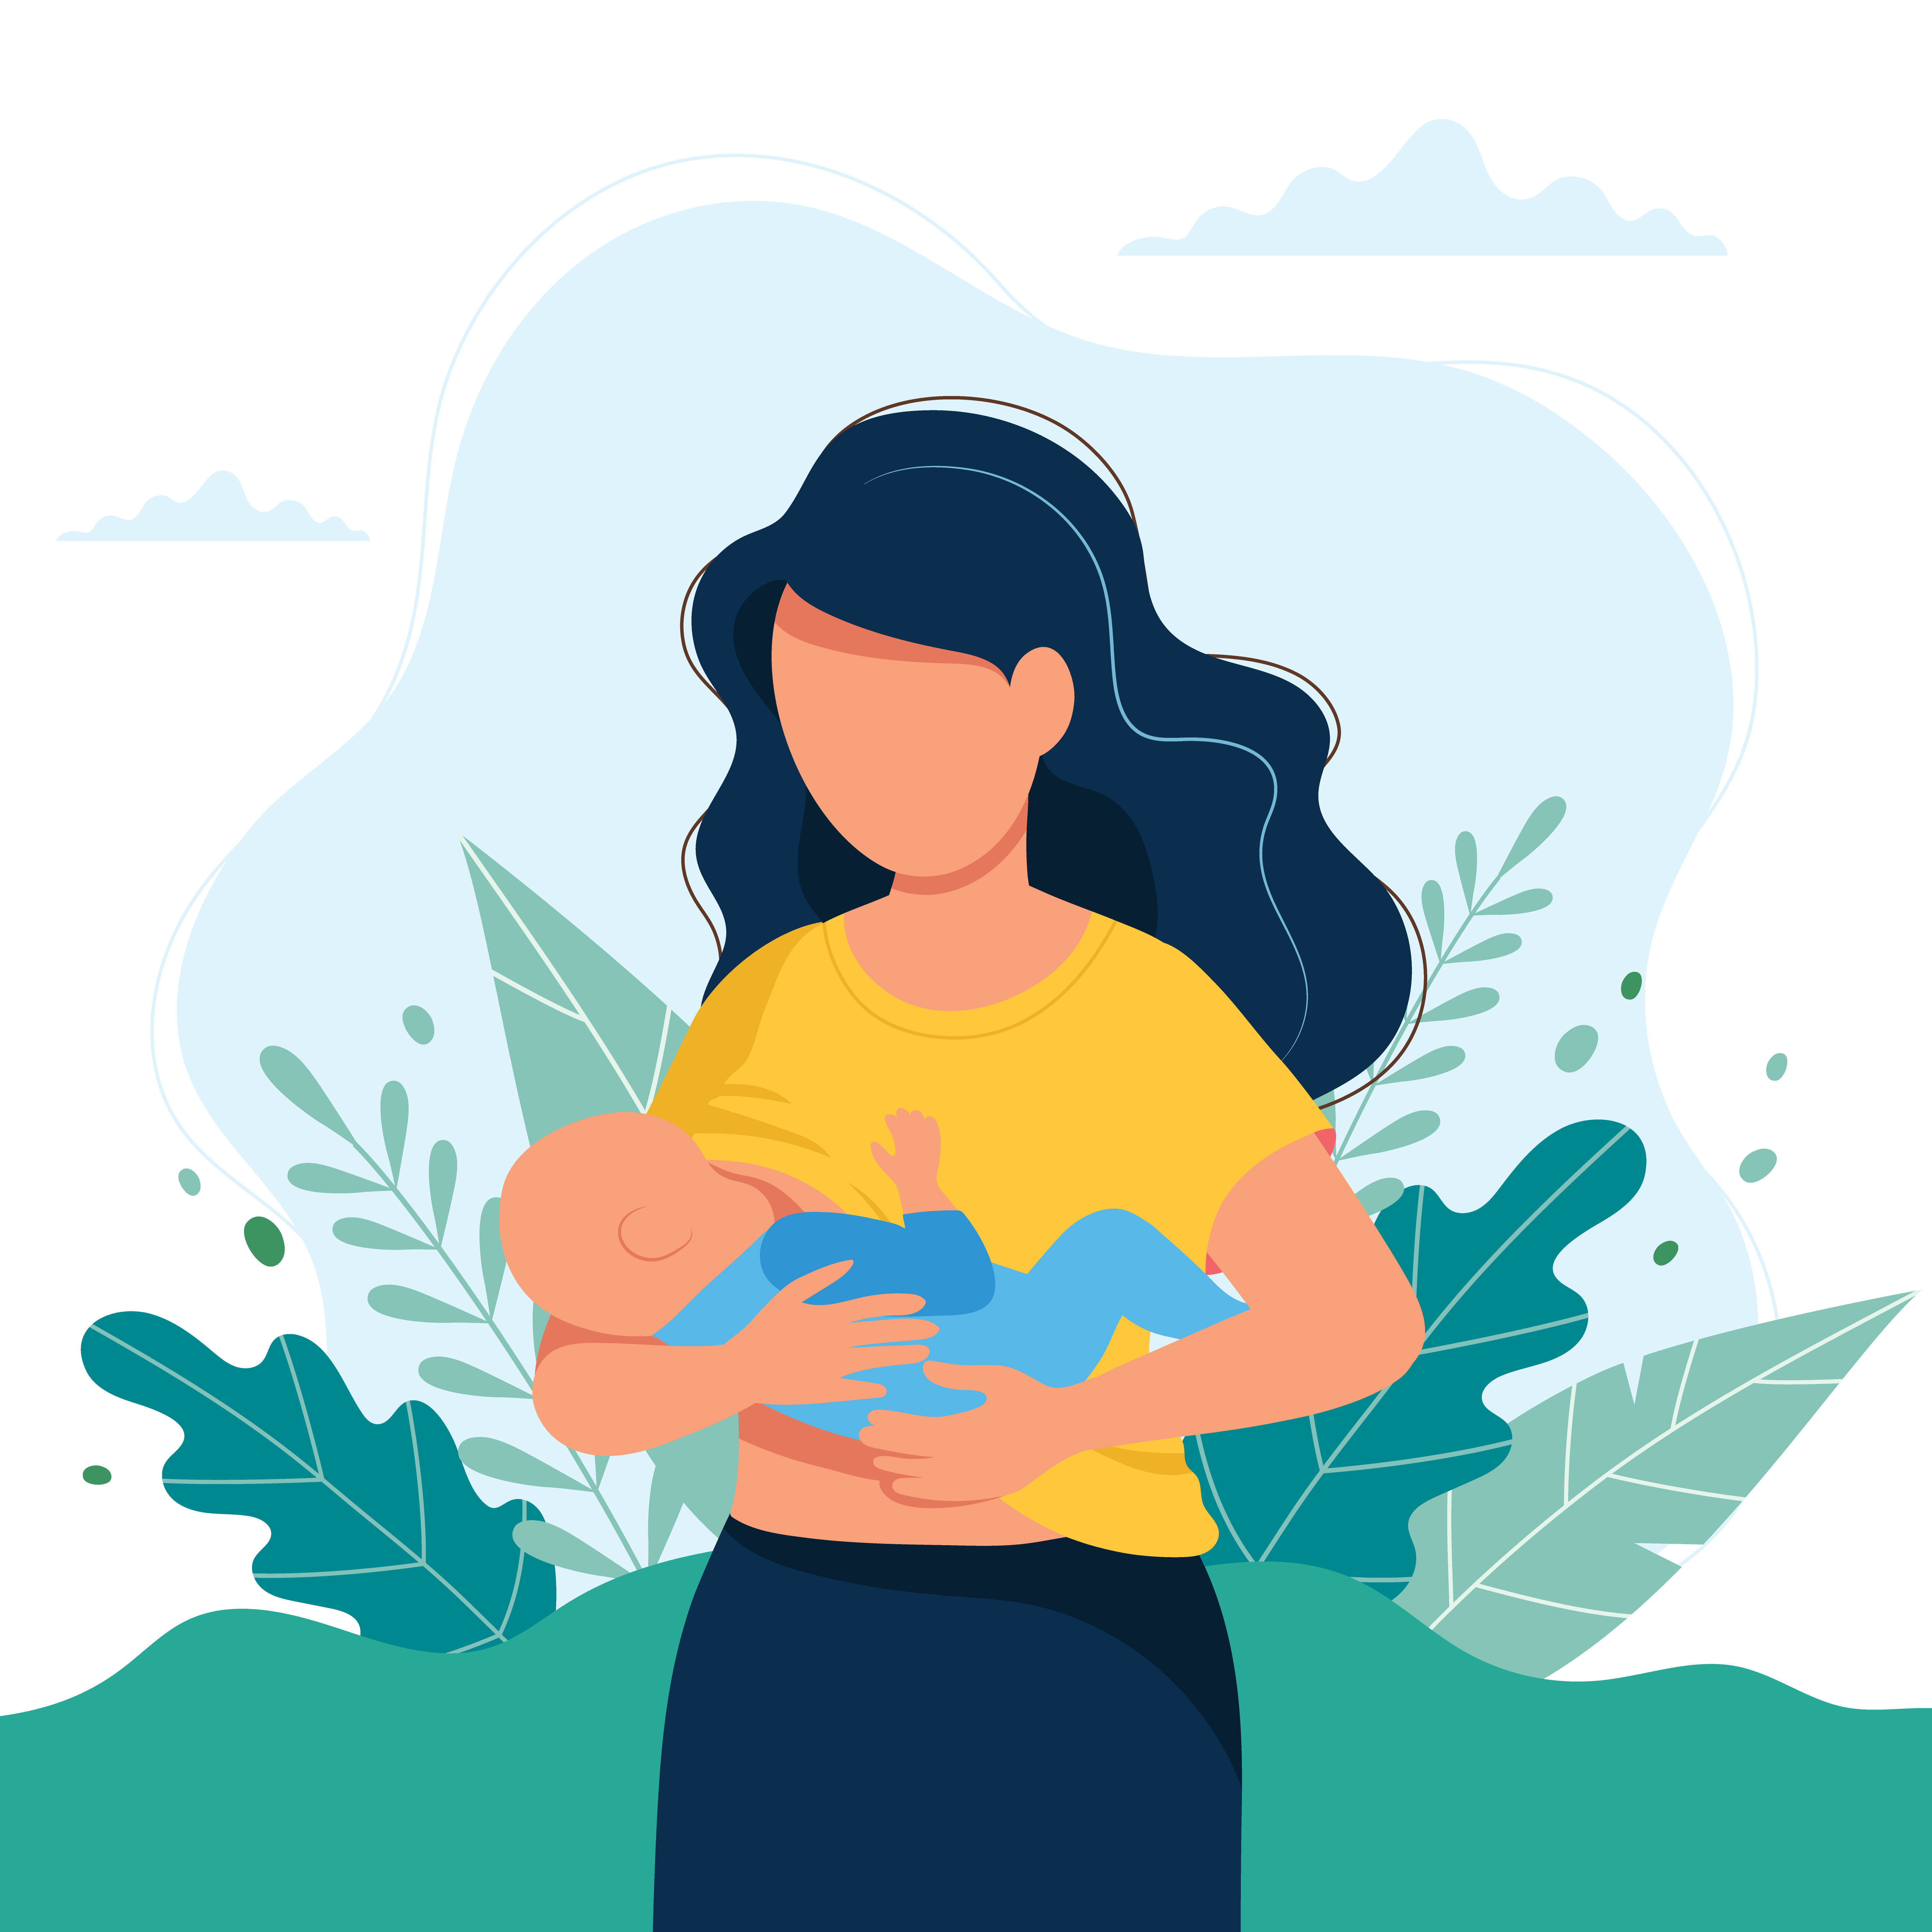 Breastfeeding illustration, mother feeding a baby with breast on